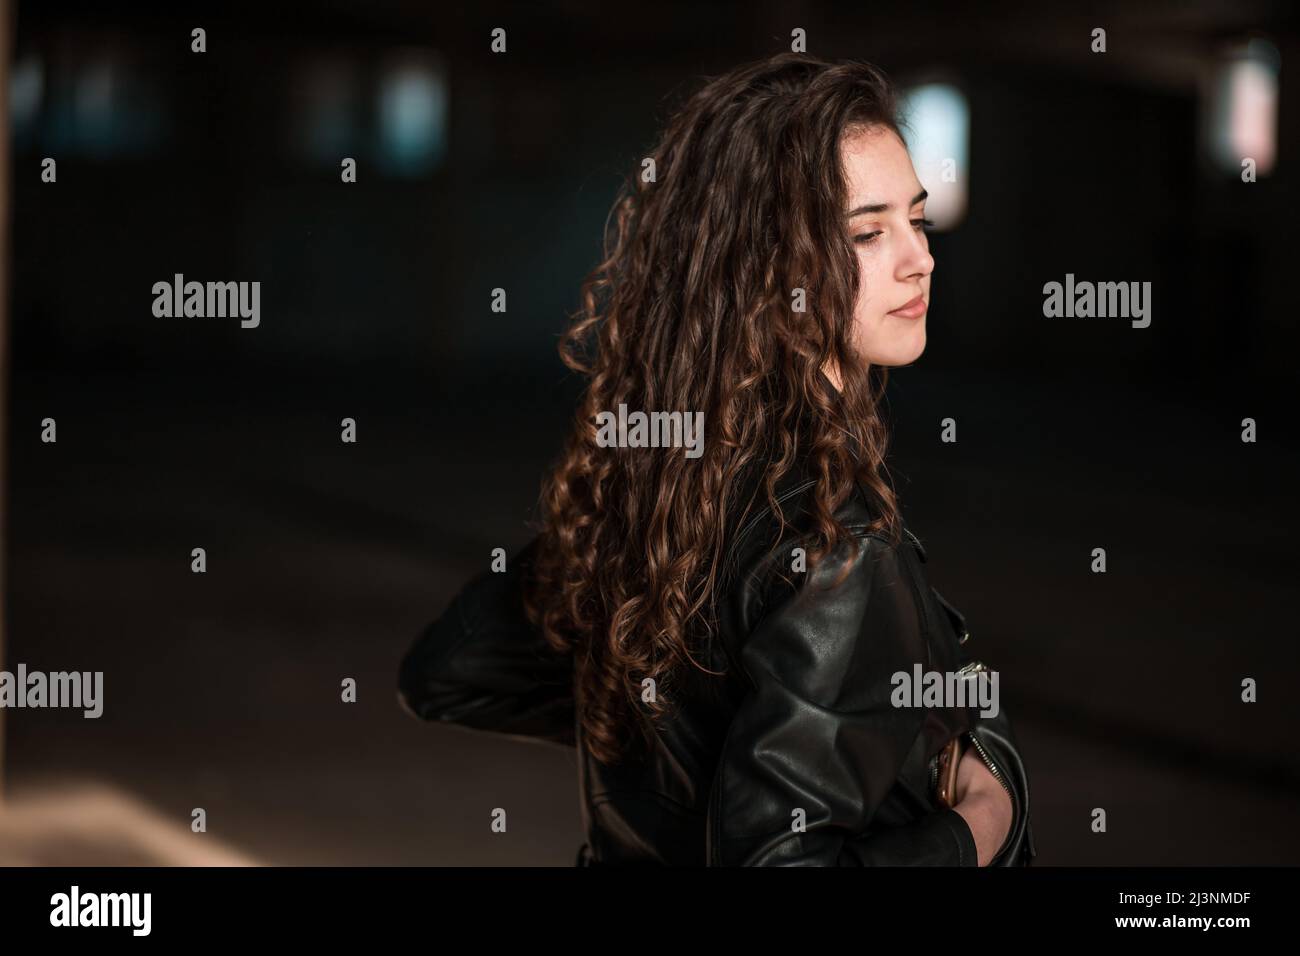 Portrait of a beautiful teen brunette girl in leather jacket, back view. Copy space Stock Photo